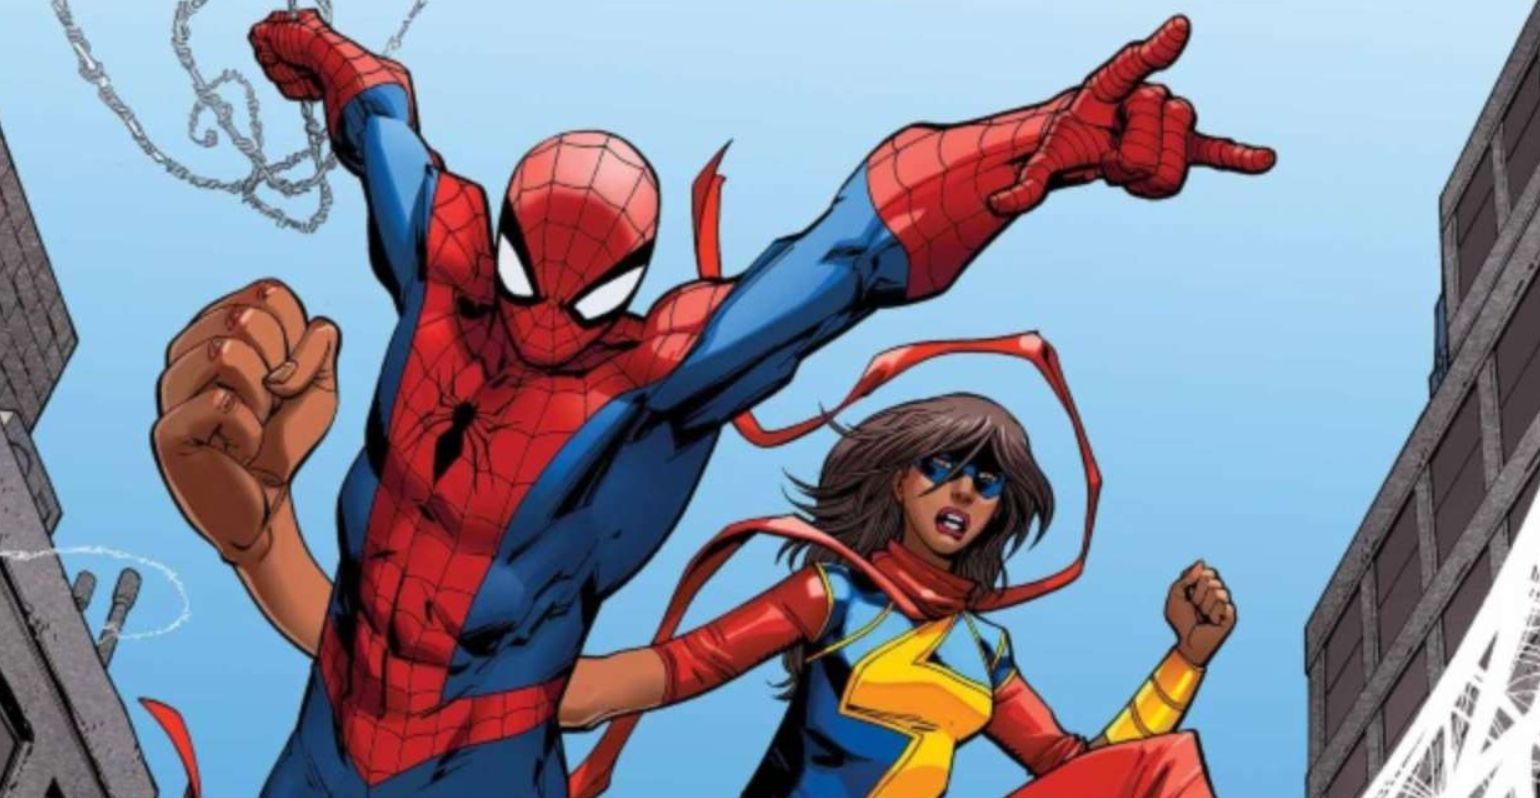 Spider-Man and Ms. Marvel swing into battle in Marvel Comics.